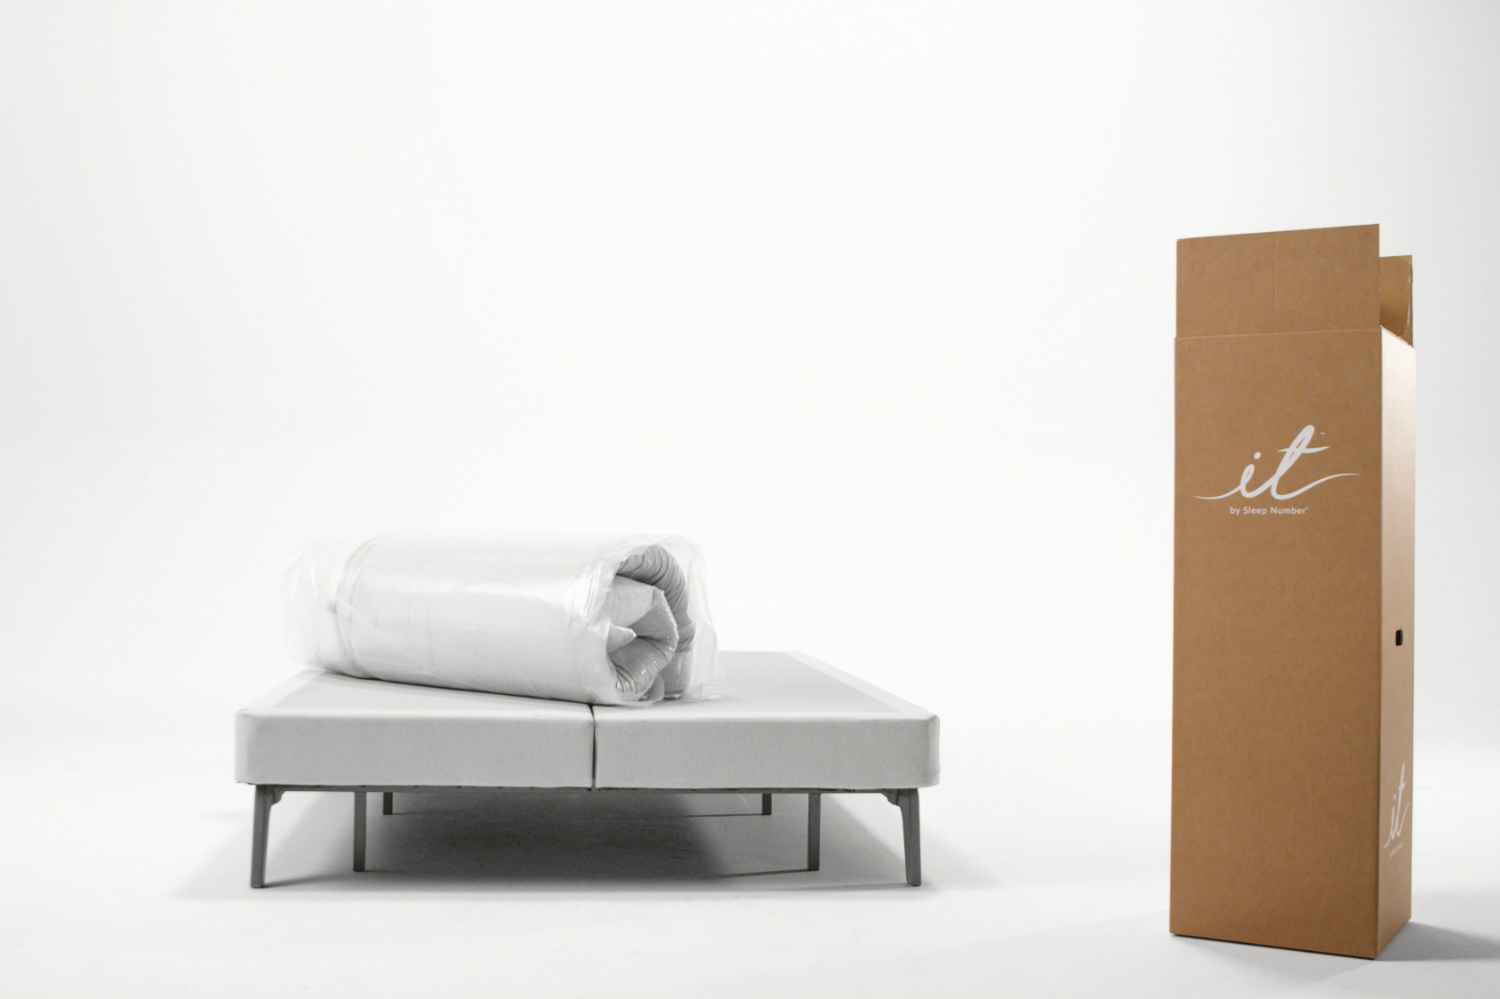 sleep number it bed smart mattress box and